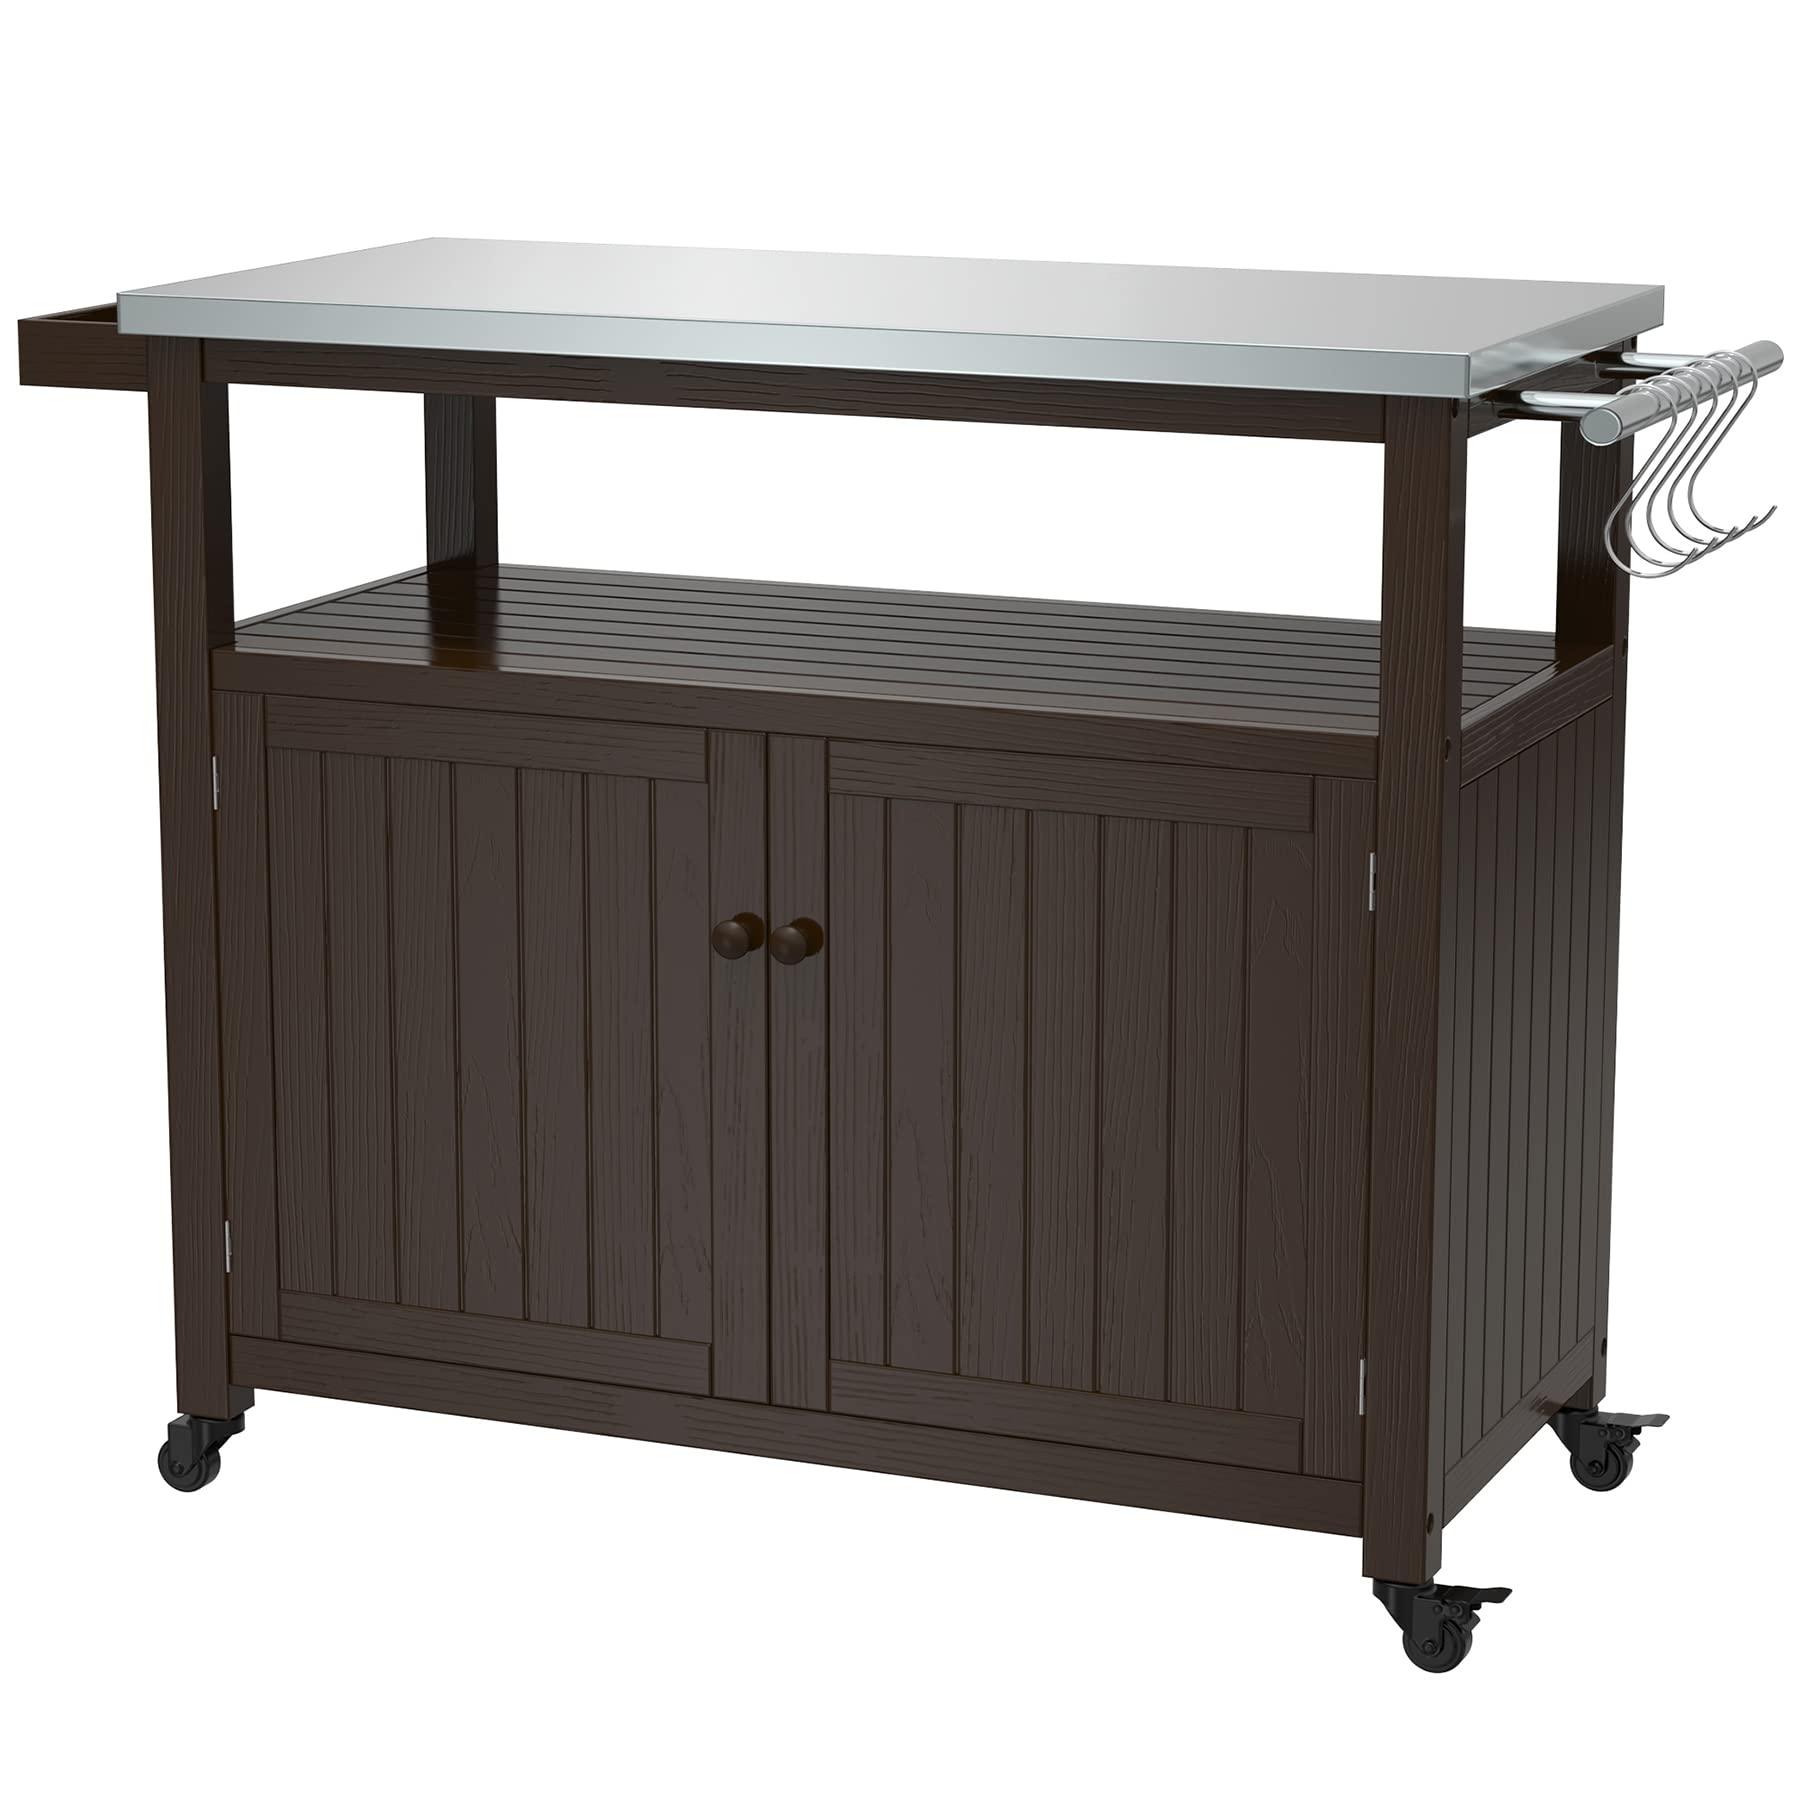 GDLF Outdoor Storage Cabinet Solid Wood Prep Grill Table with Stainless Steel Top Waterproof Cover Dark Brown - CookCave